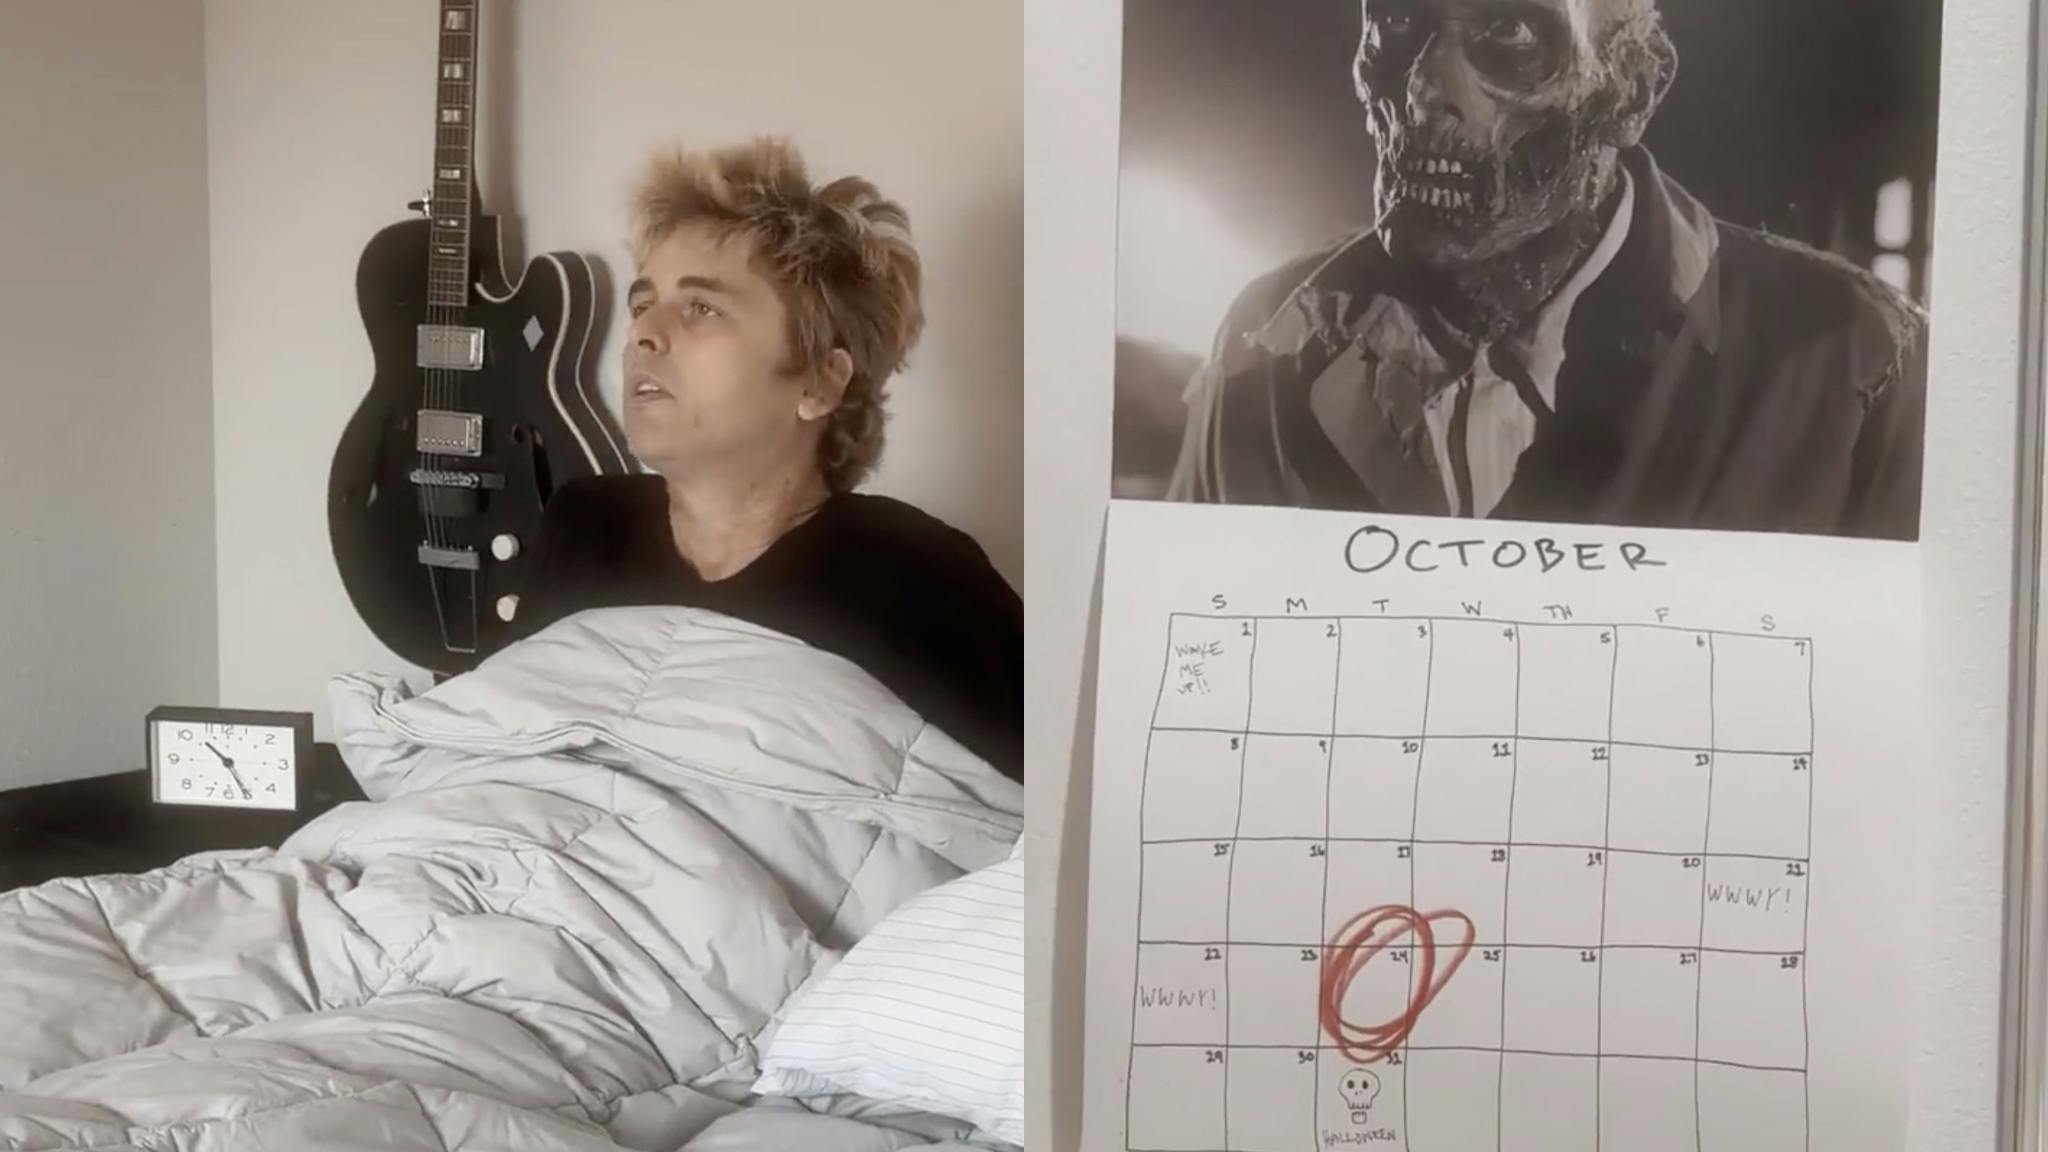 Green Day are teasing something with new video and website